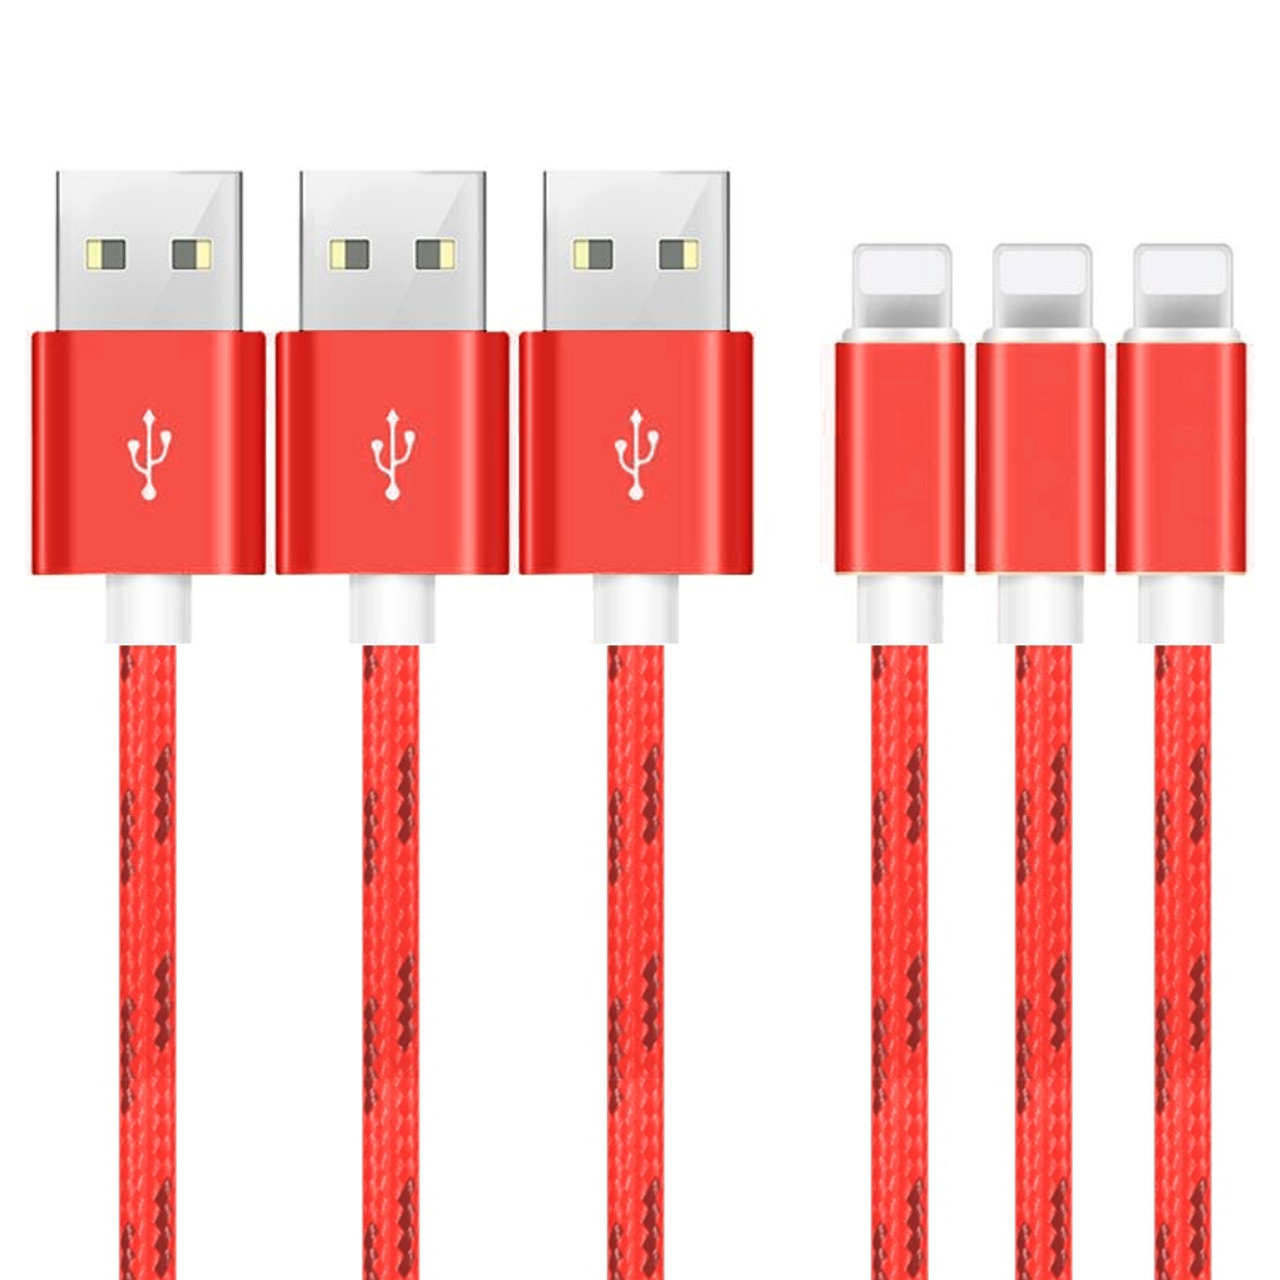 10-Foot Camo Braided MFi Lightning Cable (3-Pack) product image